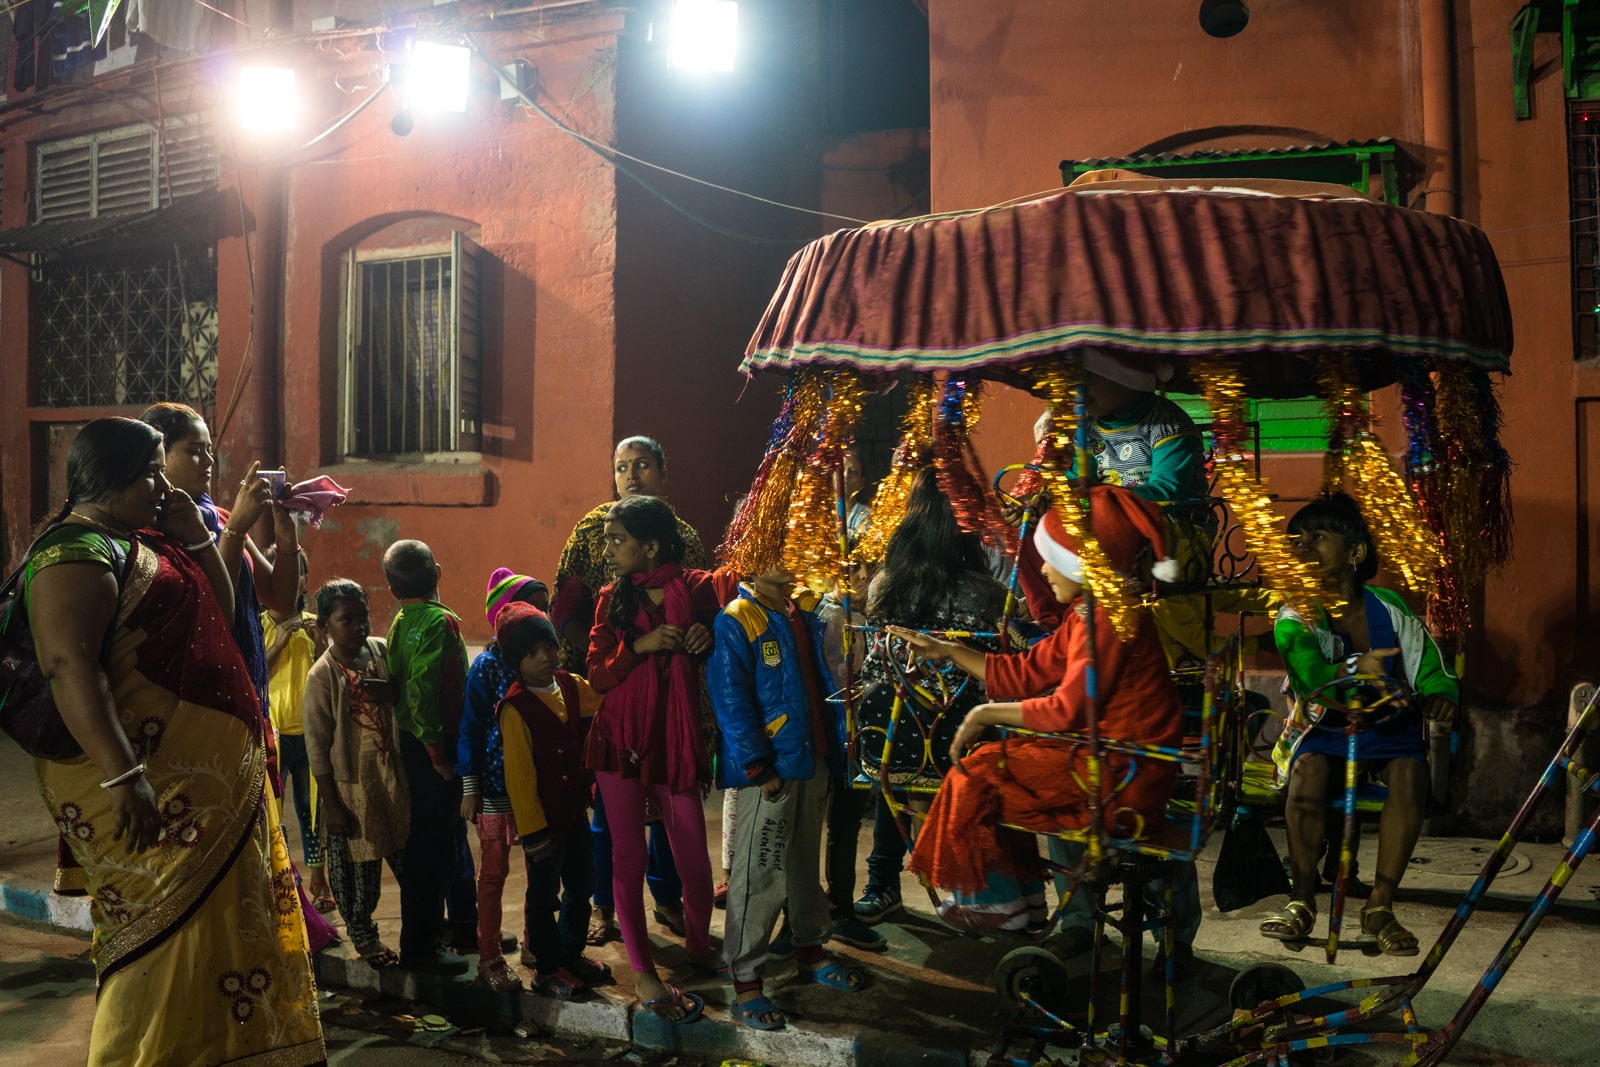 Guide to Christmas in Kolkata, India - Children on an amusement ride in Barracks neighborhood on Christmas Eve - Lost With Purpose travel blog